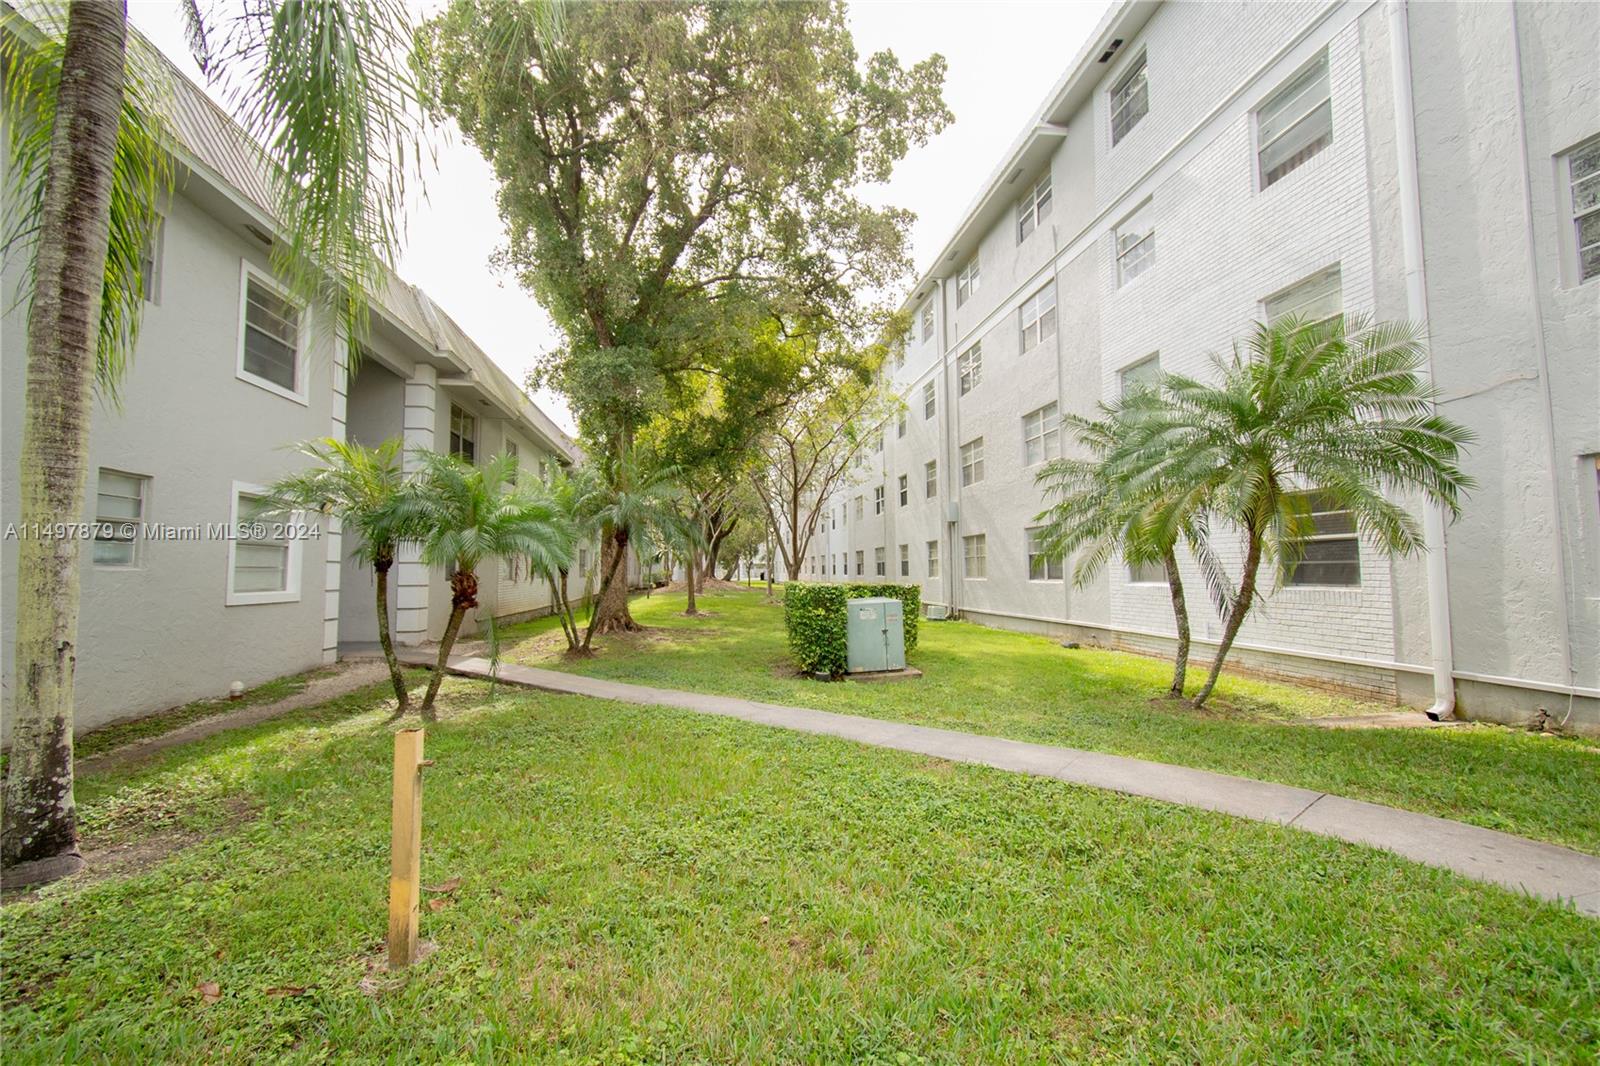 Great location opportunity and a starter home in this well-kept community of Village Homes and Condos at Palmetto Bay. This updated corner Condo offers 1 bedroom, 1 full bathroom, 1 assigned parking space, stainless steel appliances, and tile throughout. Great location close to US-1. It won't last! Unit will be available after Feb27,2024